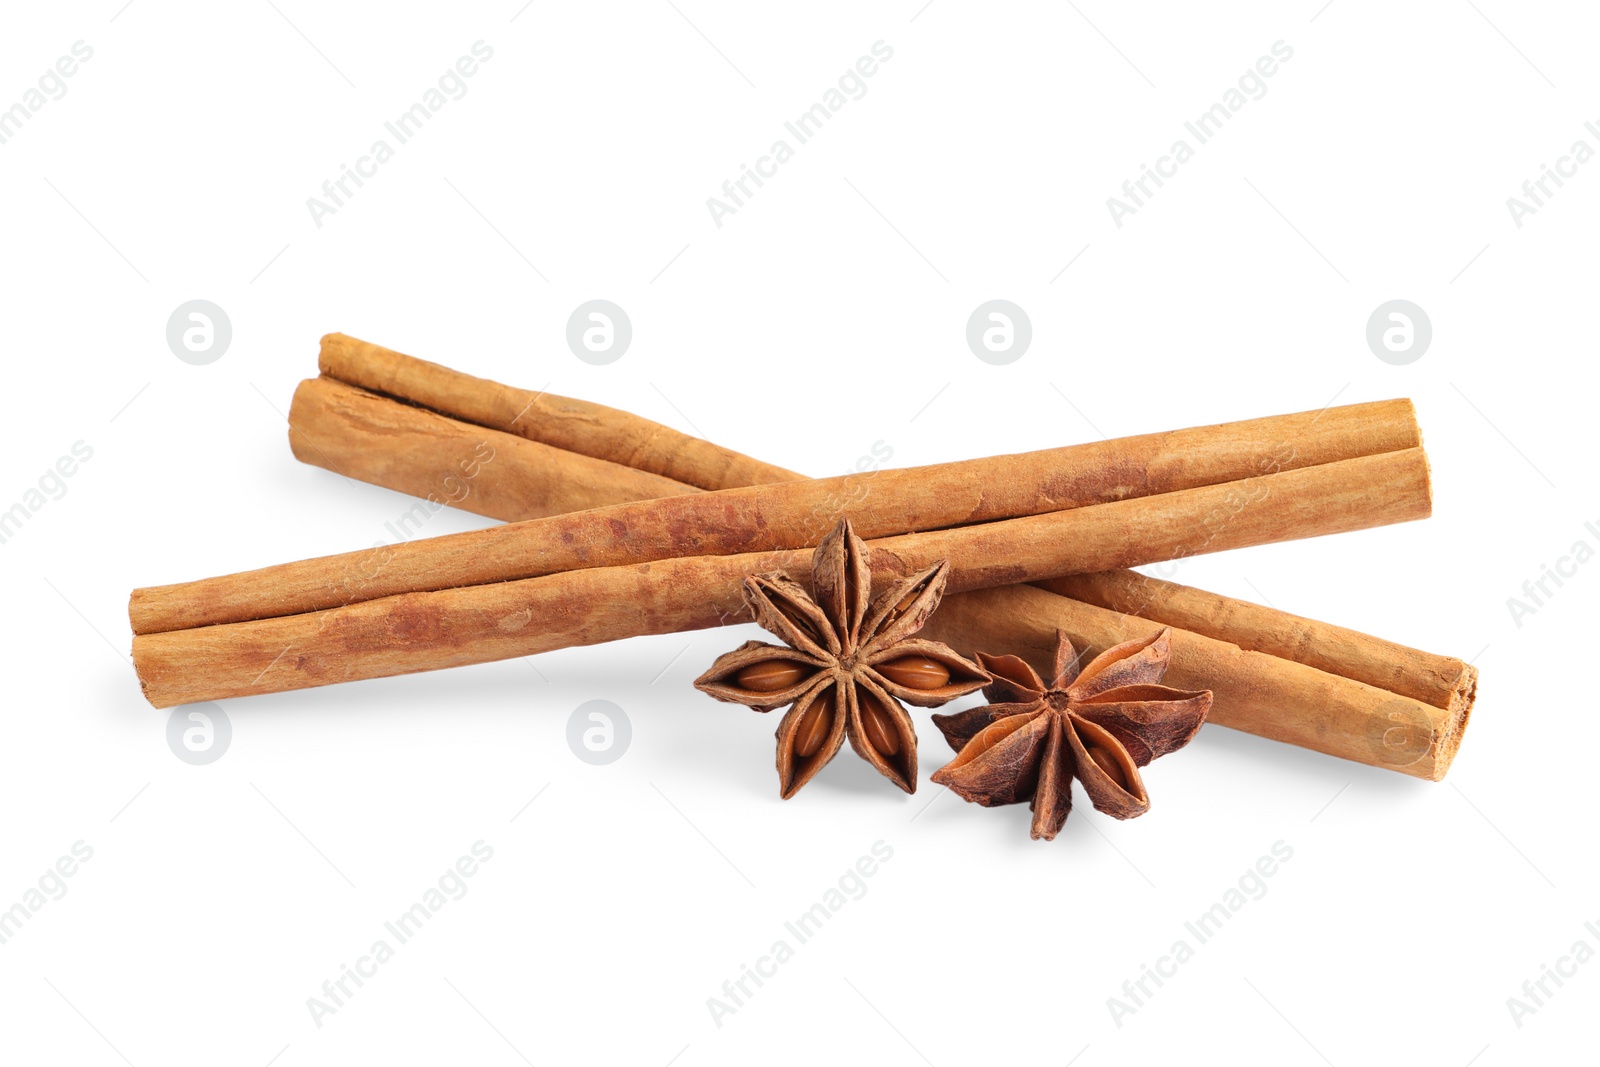 Photo of Cinnamon sticks and anise stars isolated on white